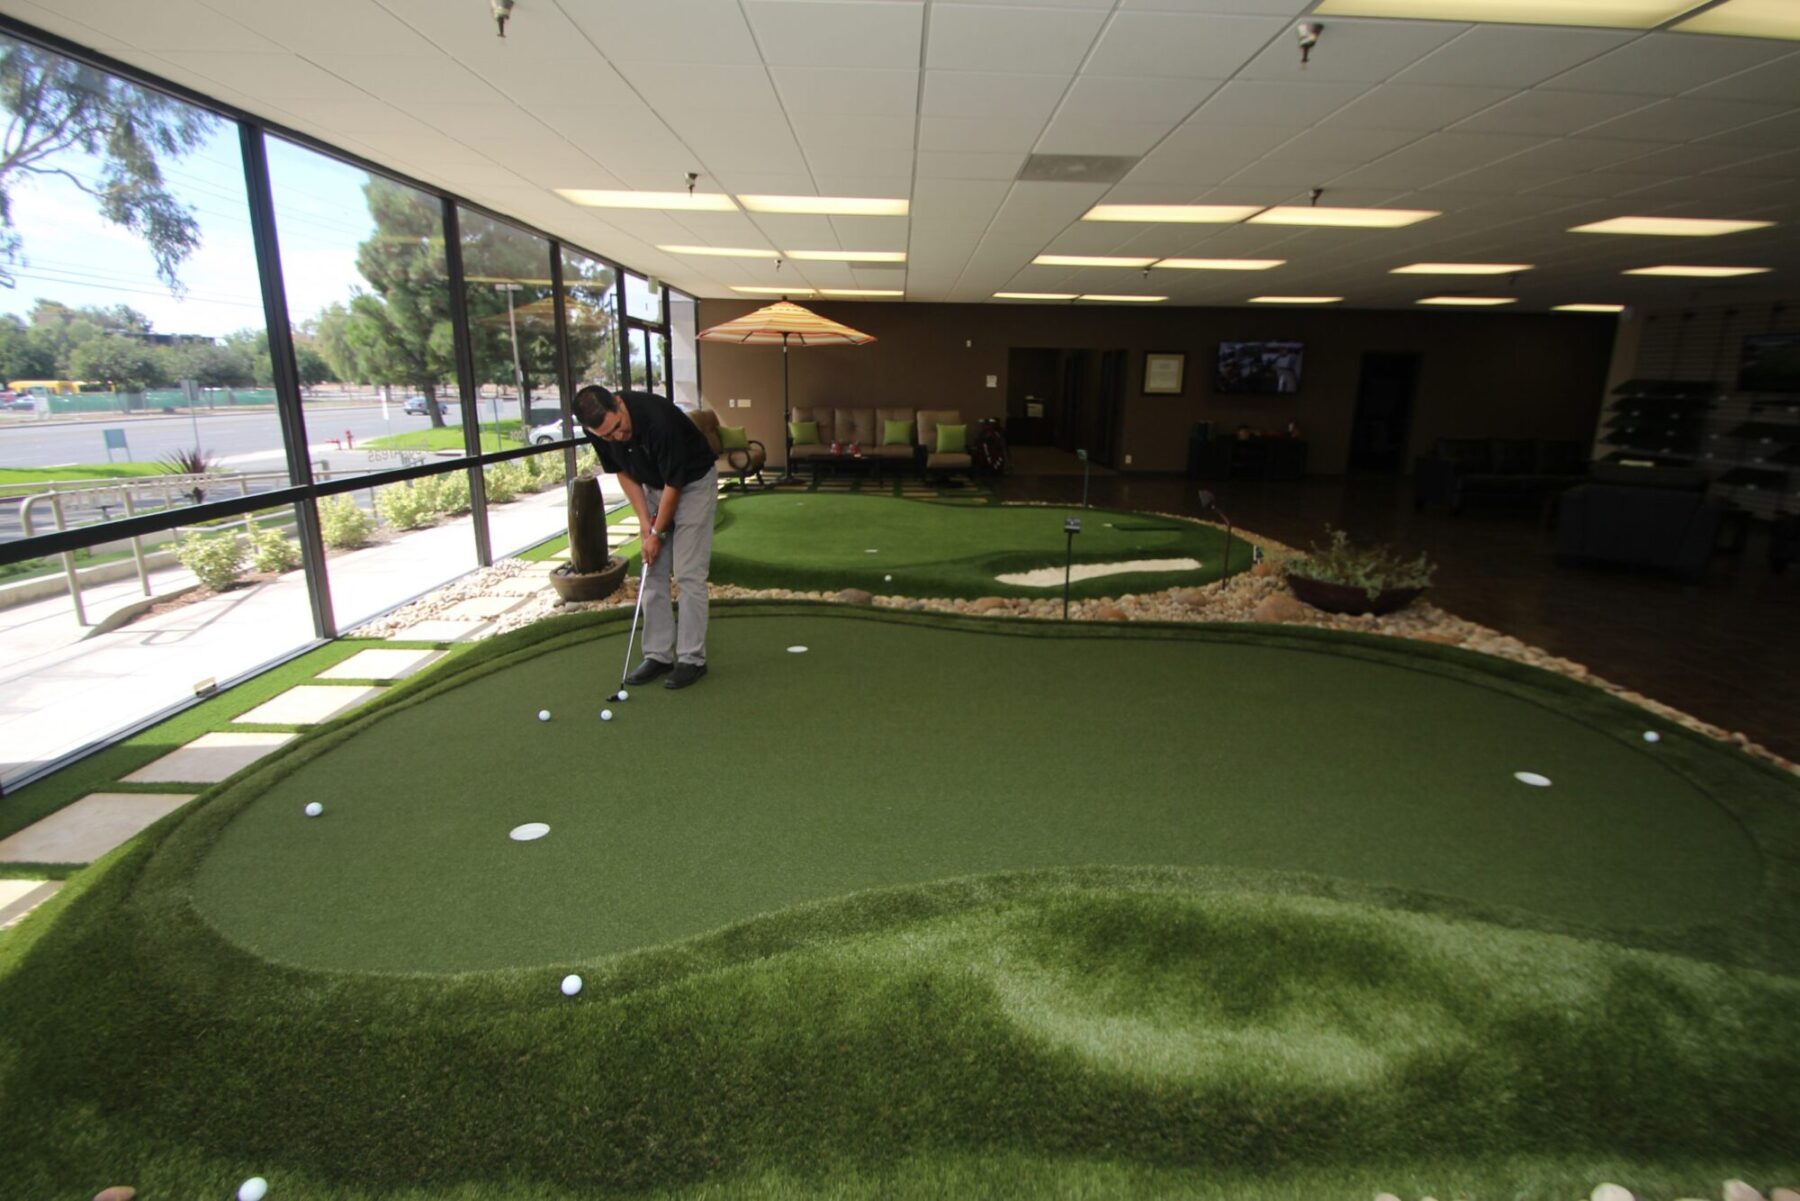 Commercial putting green near me